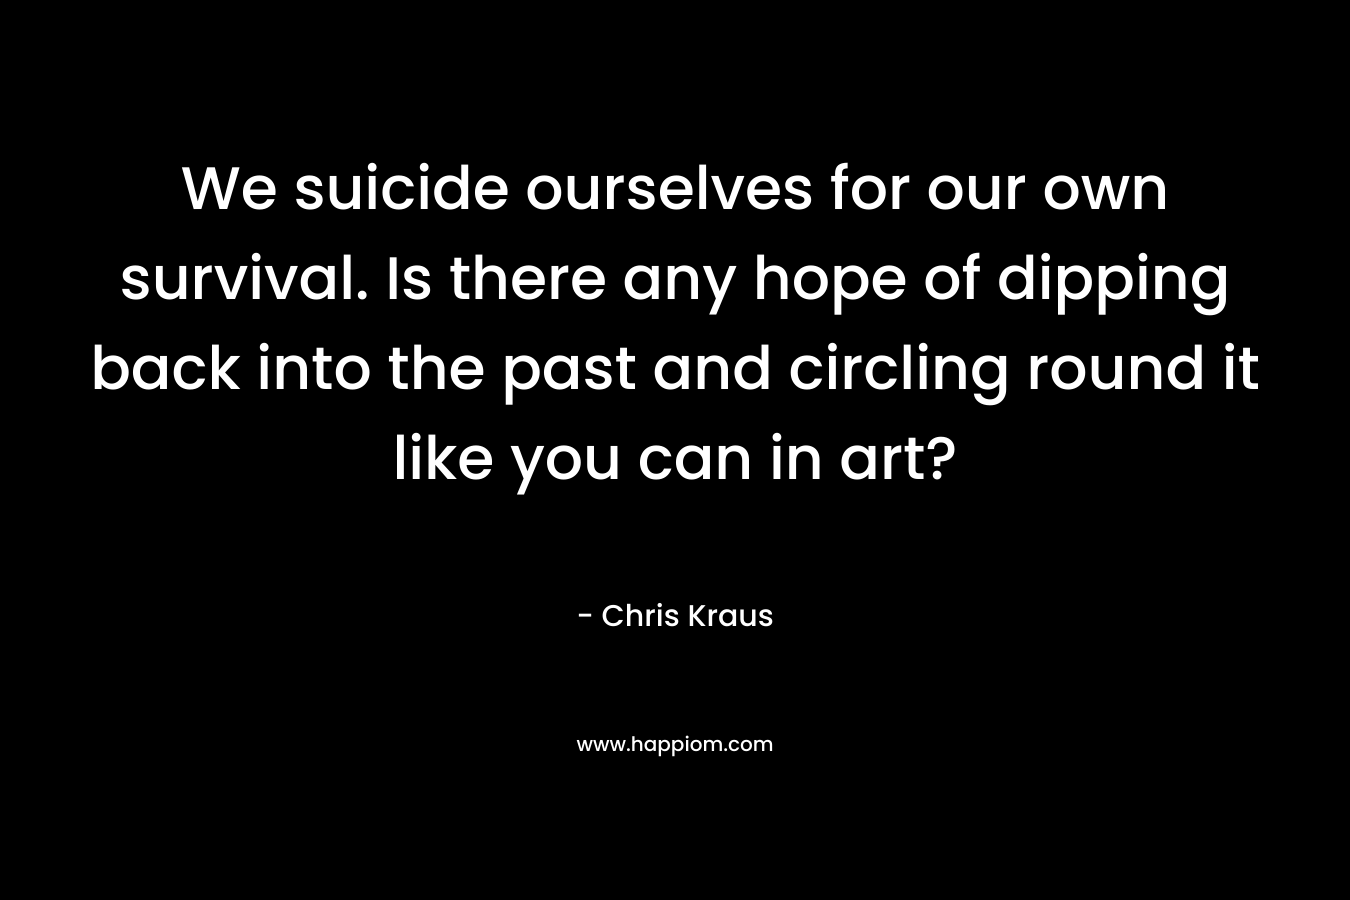 We suicide ourselves for our own survival. Is there any hope of dipping back into the past and circling round it like you can in art?